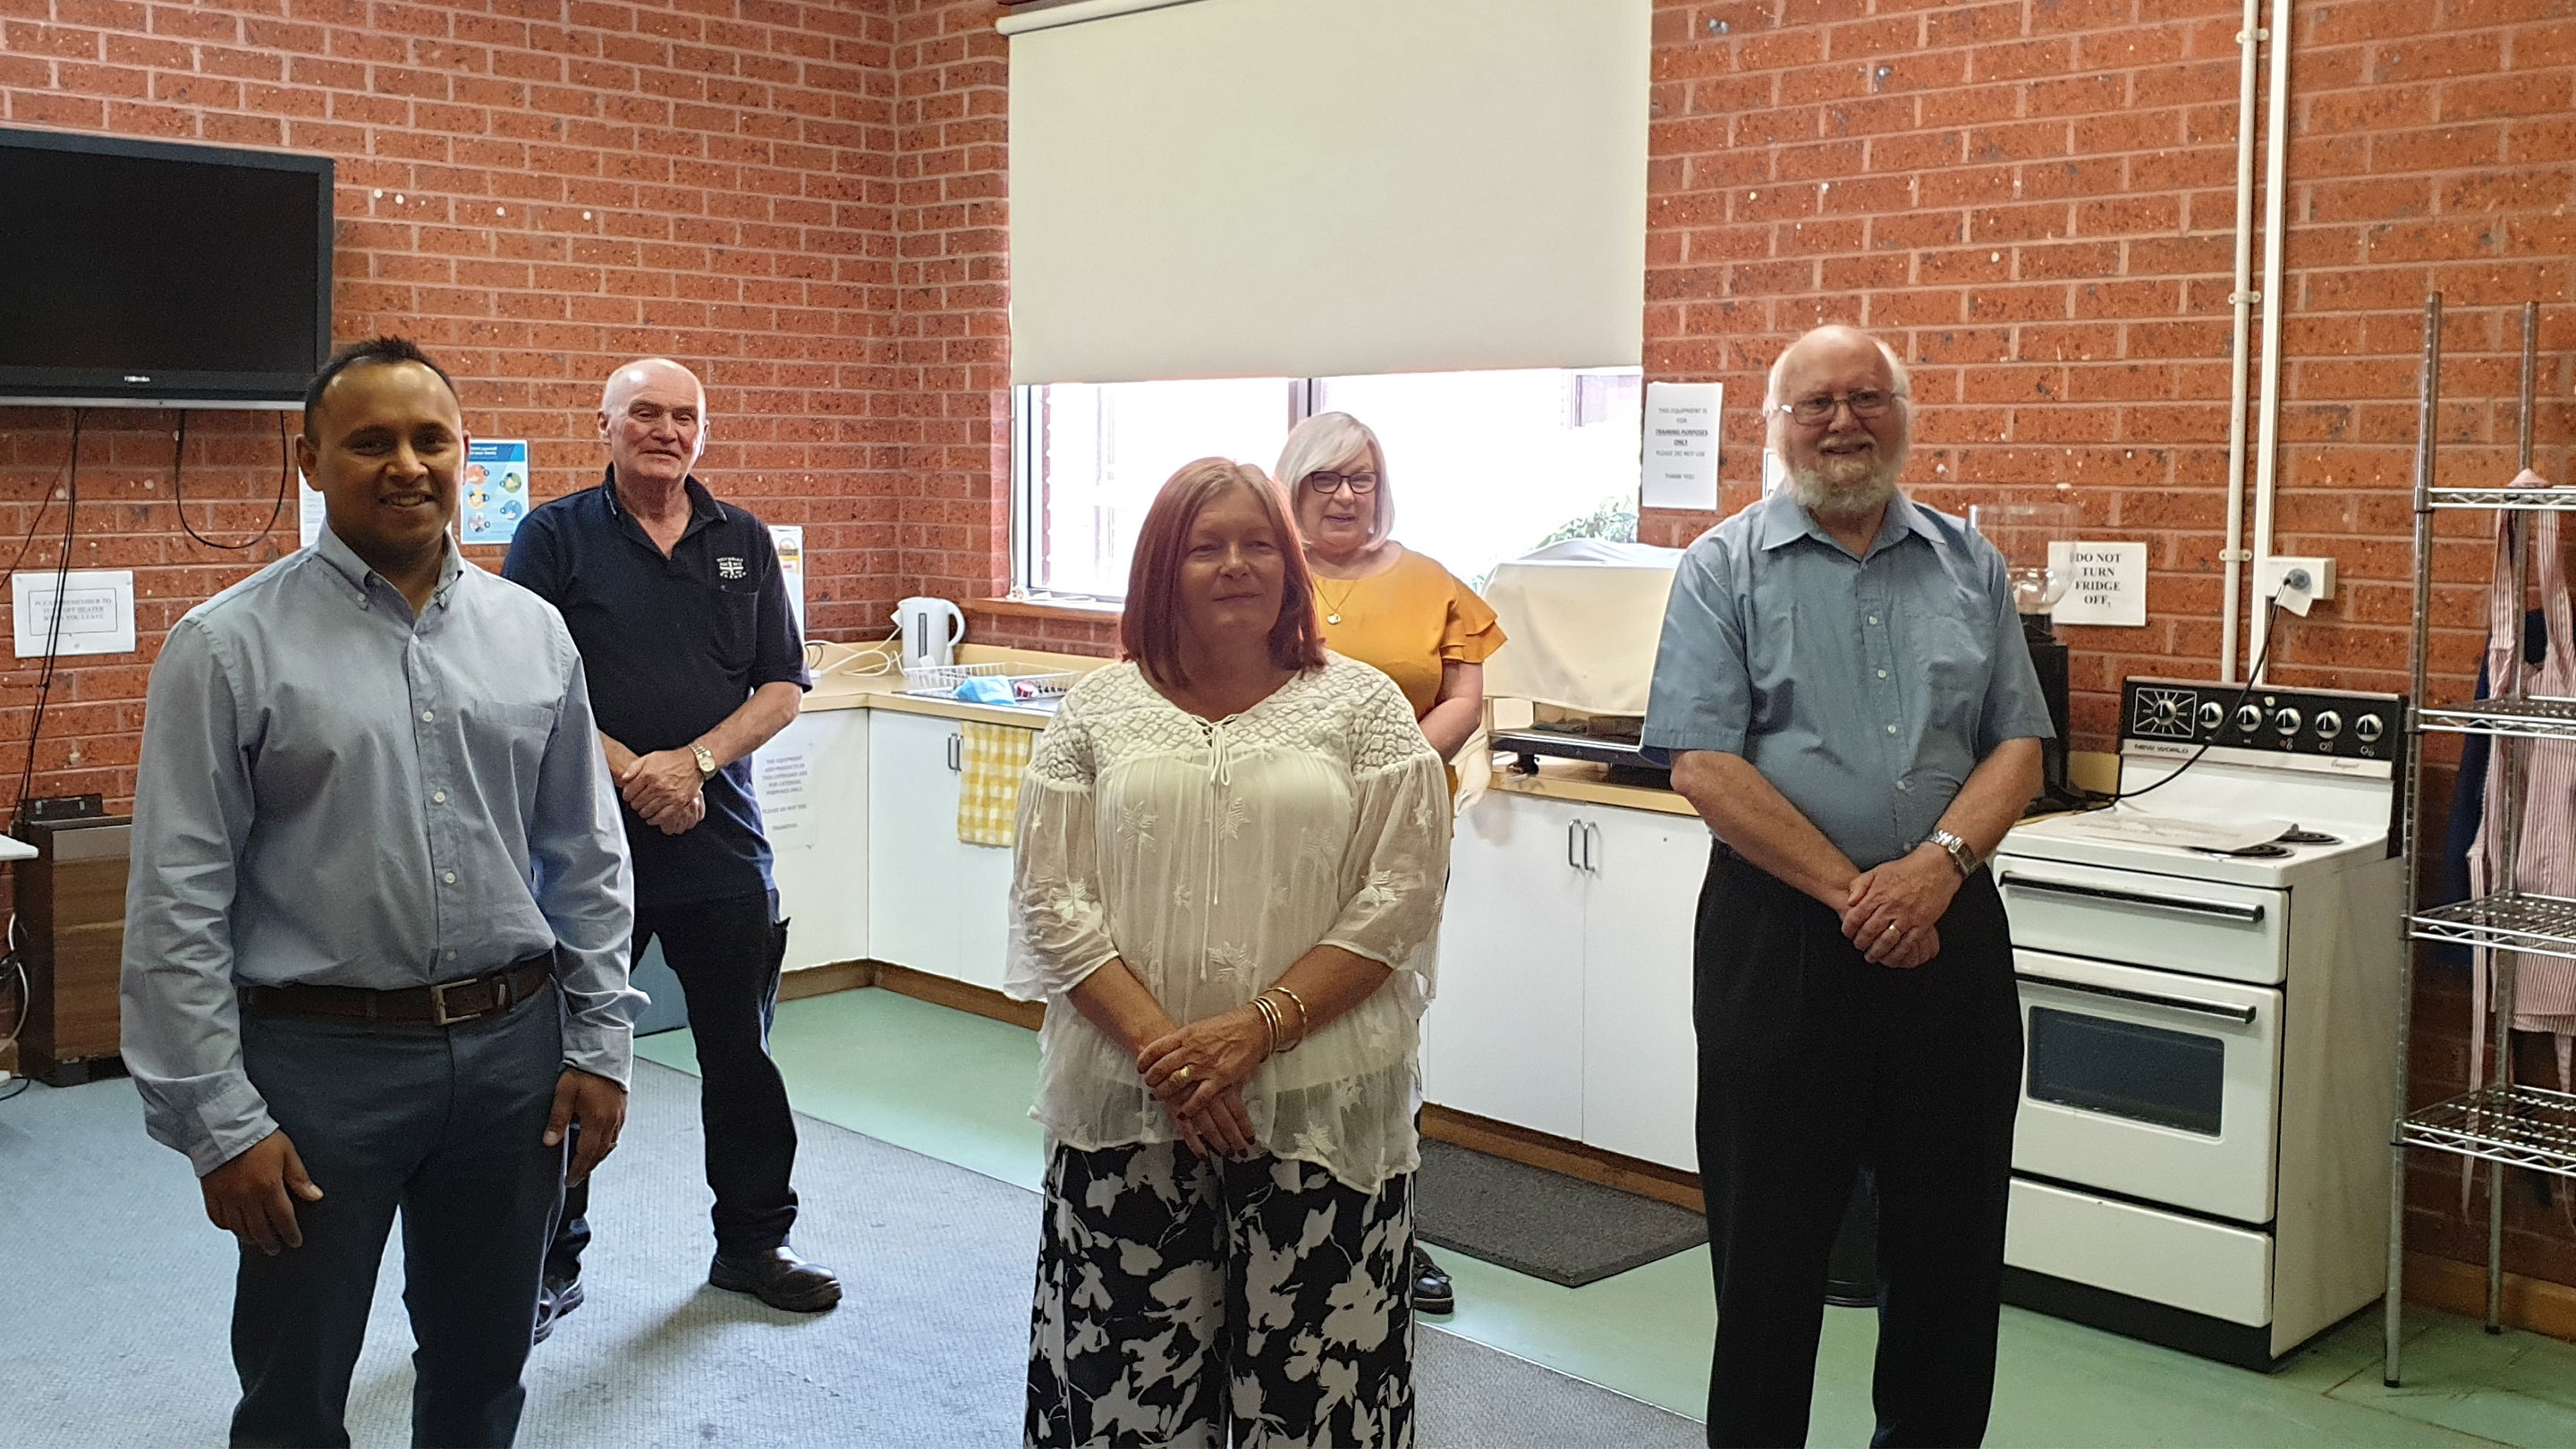 Image Esso Longford Plants Manager, Kartik Garg, recently visited the Gippsland Employment Skills Training hub in Moe, where the kitchen will get an upgrade thanks to support from Esso Australia.